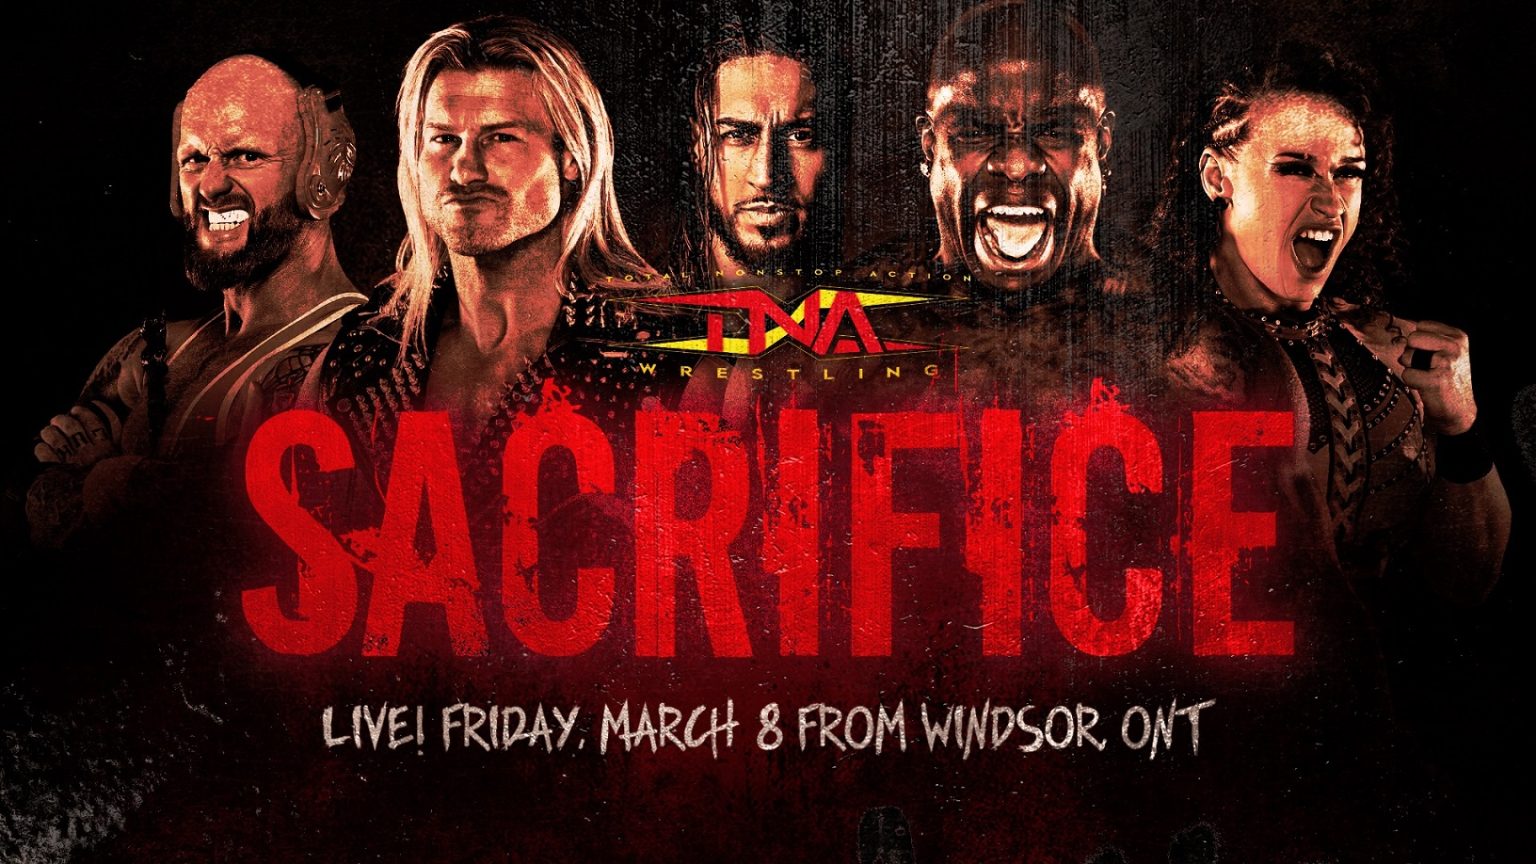 SACRIFICE-2024-UPDATED-TALENT-FRIDAY-MARCH-8-WINDSOR-ONT-1536x864.jpg